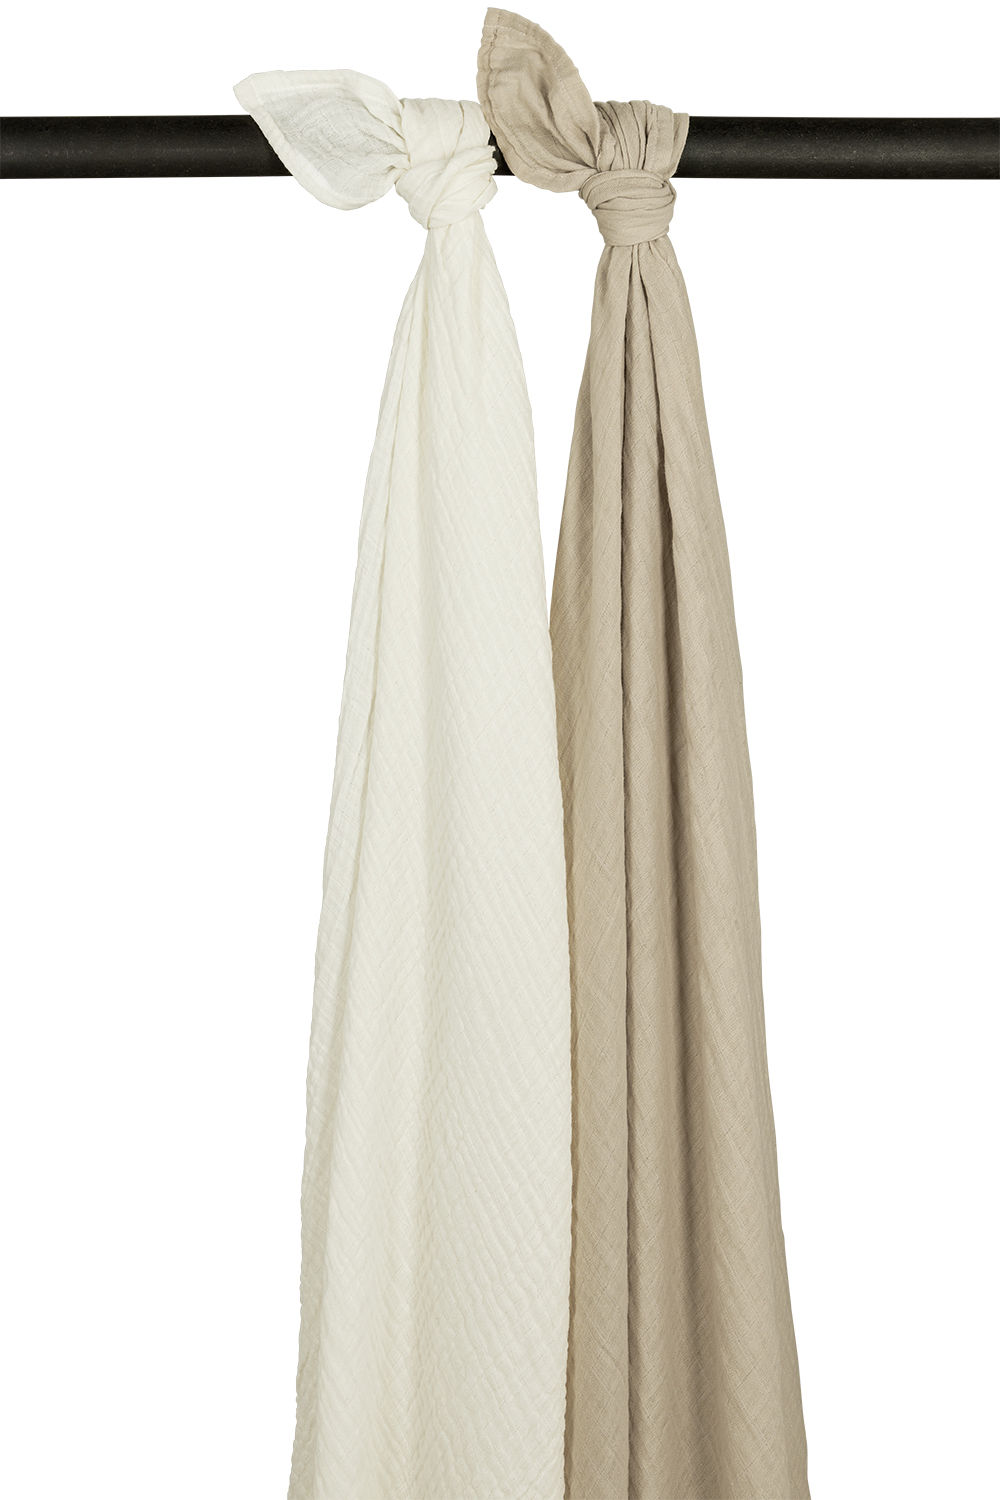 Swaddle  2er pack musselin Uni - offwhite/sand - 120x120cm